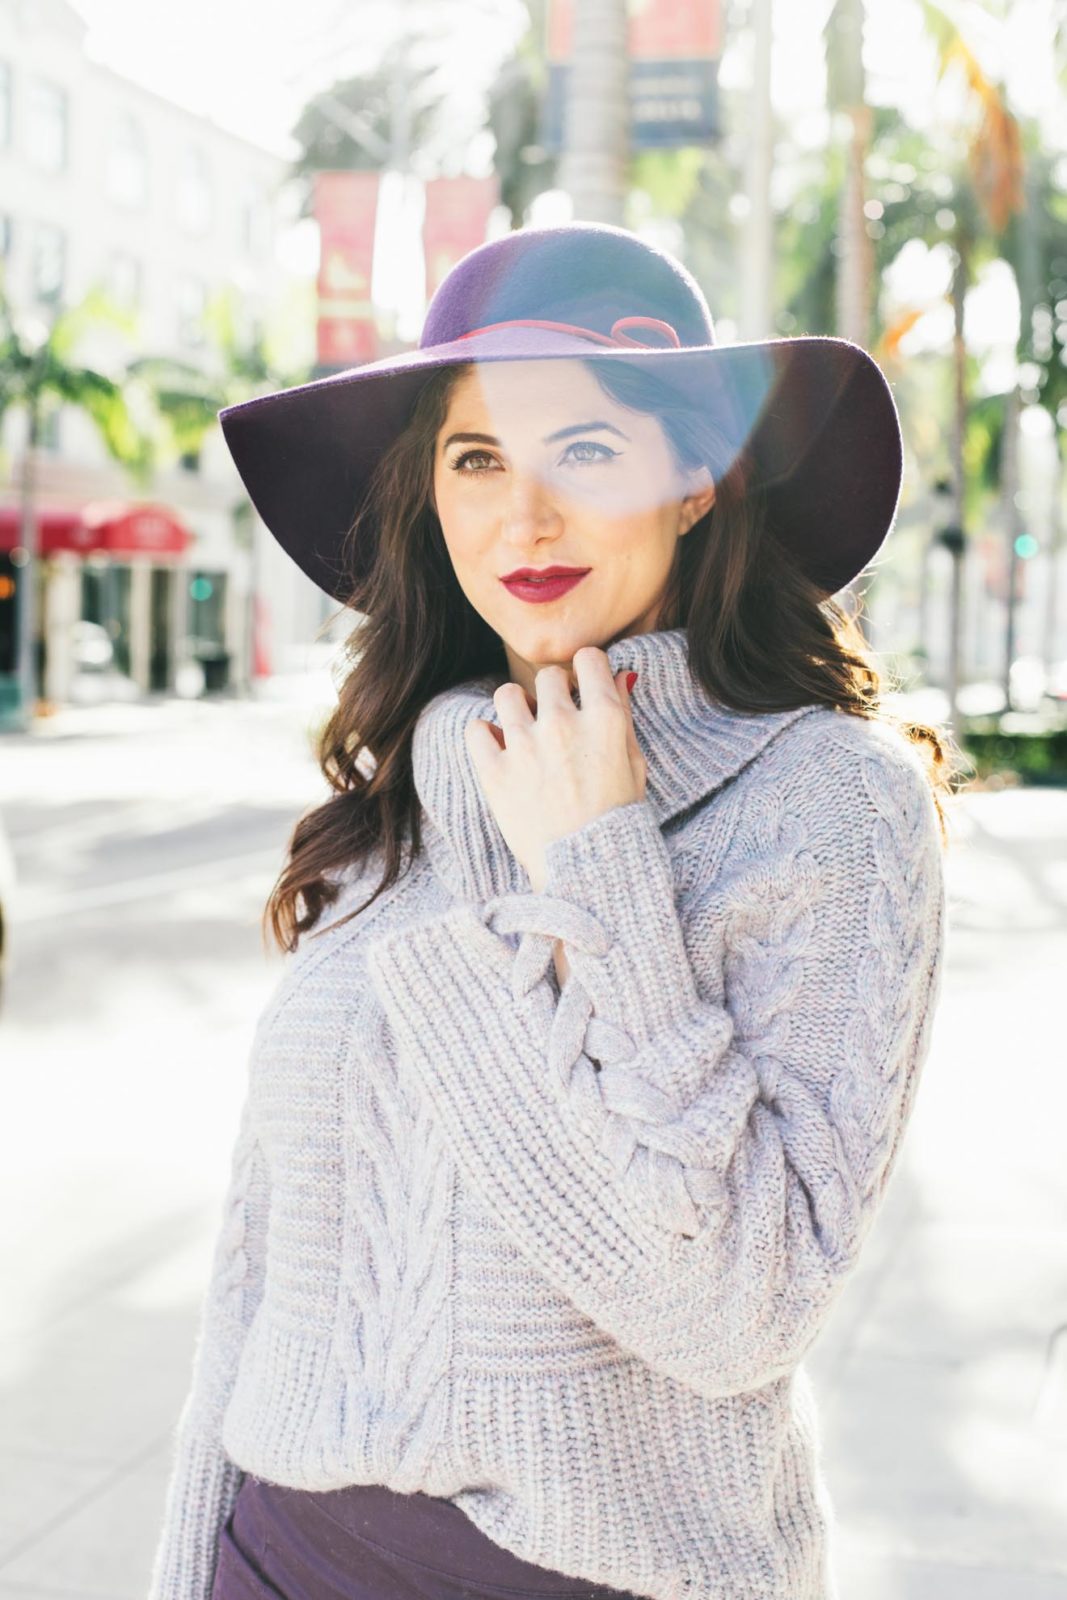 Bell Sleeve Sweaters by Los Angeles Fashion Blogger Laura Lily, Purple suede prada bag